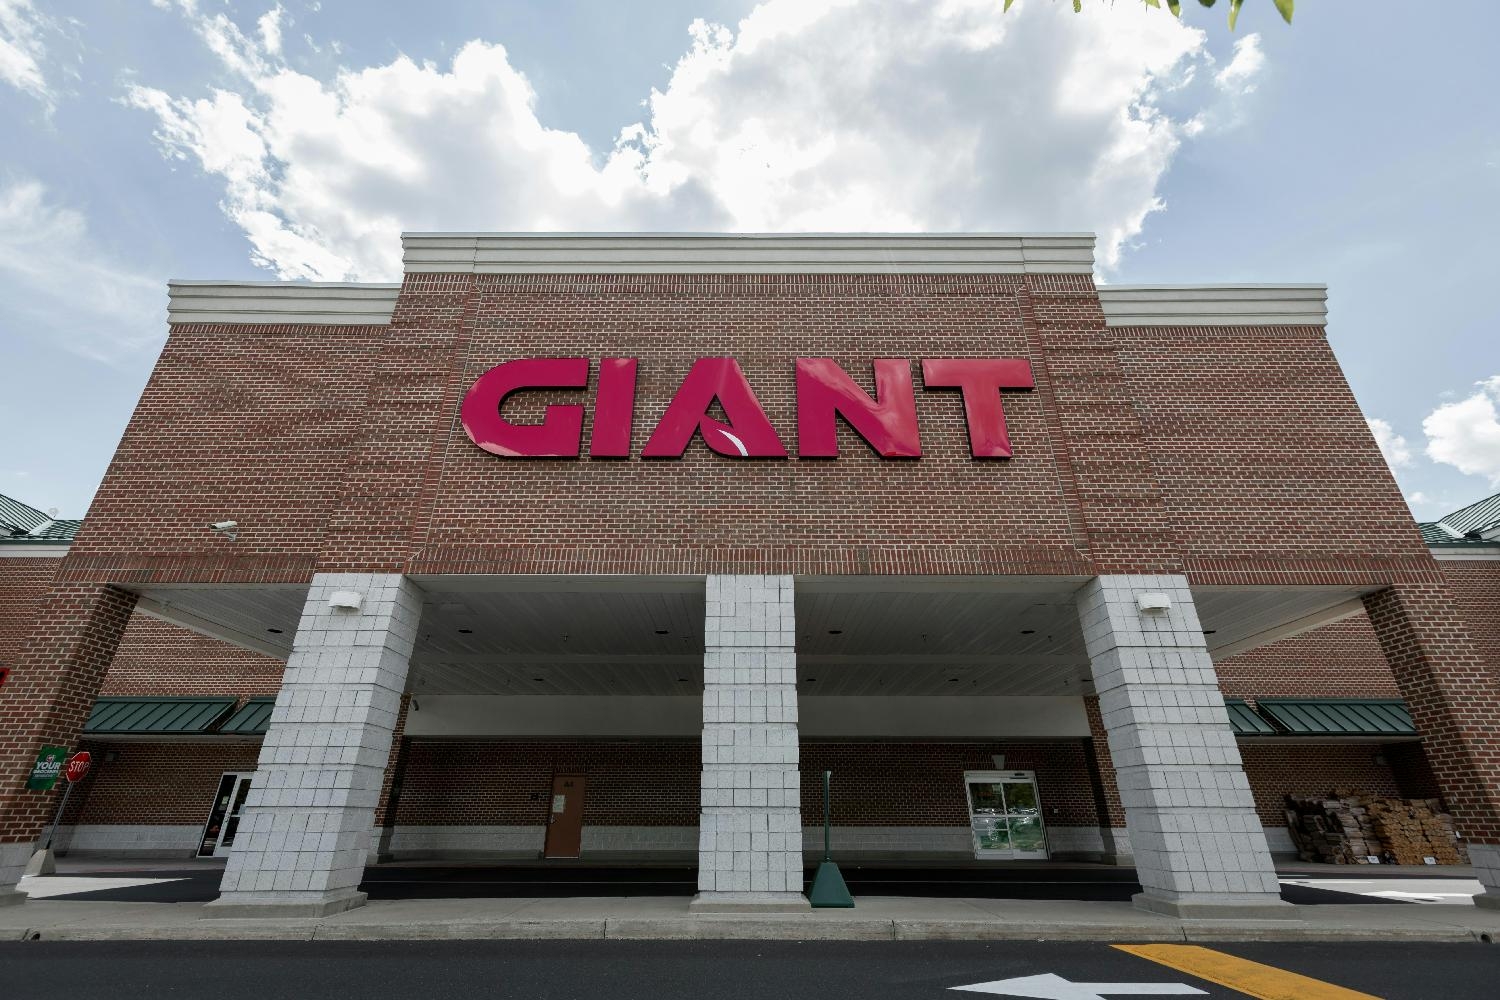 The GIANT Company storefront in Willow Grove, PA